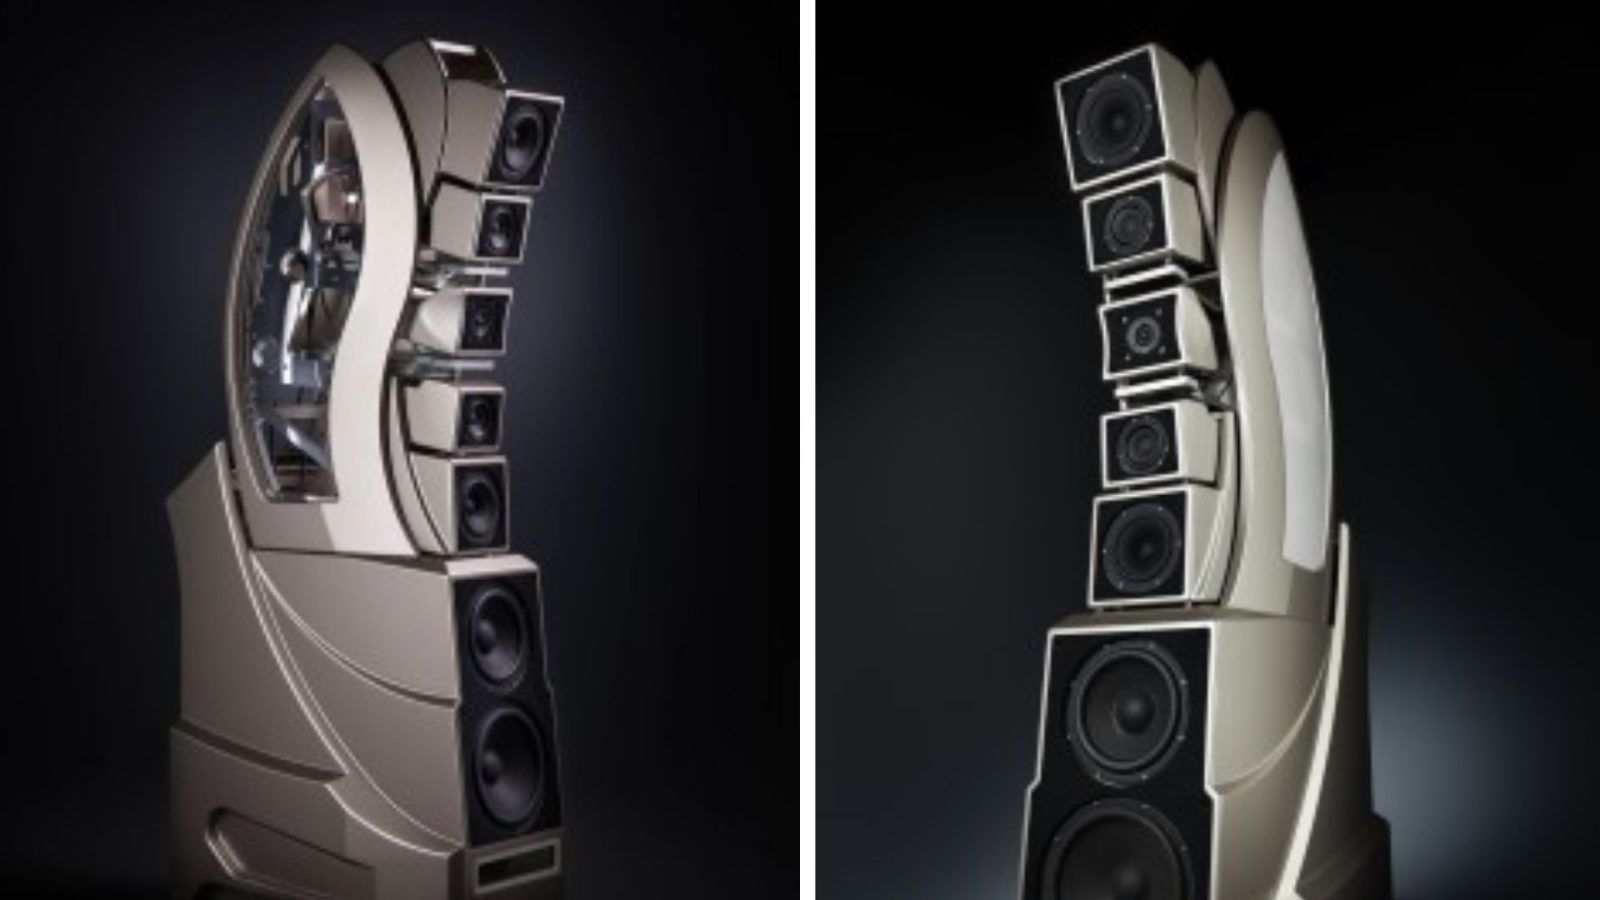 Most Expensive Speakers in the World